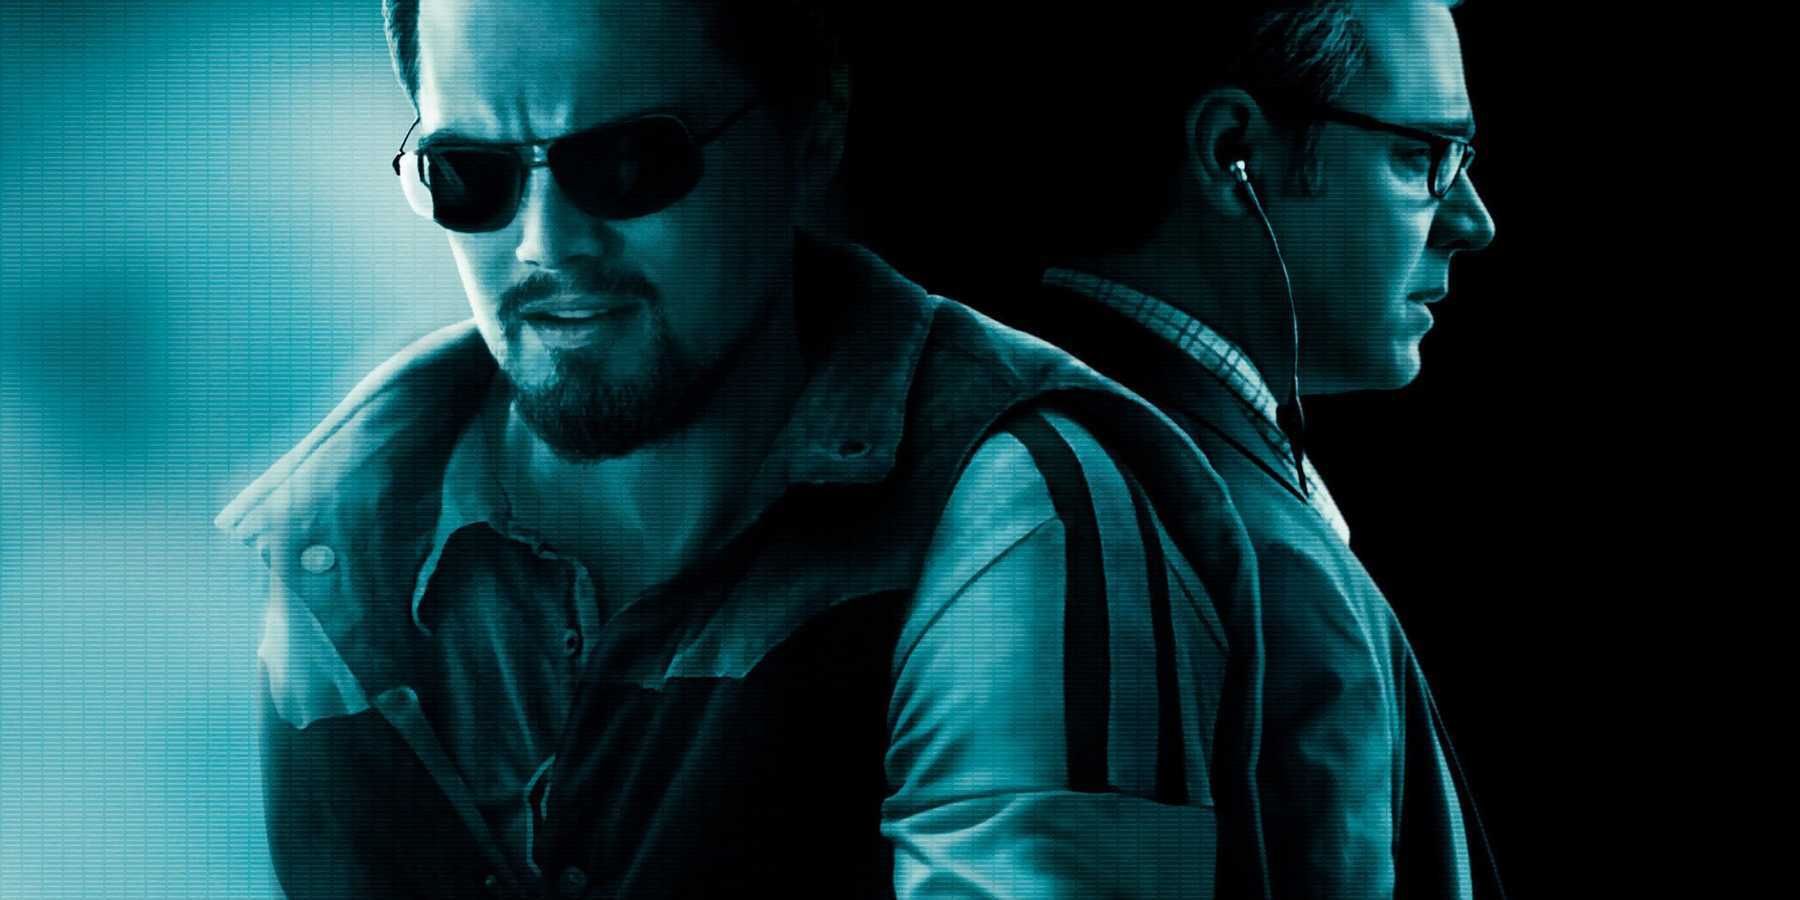 Every Leonardo DiCaprio Movie Ranked From Worst to Best